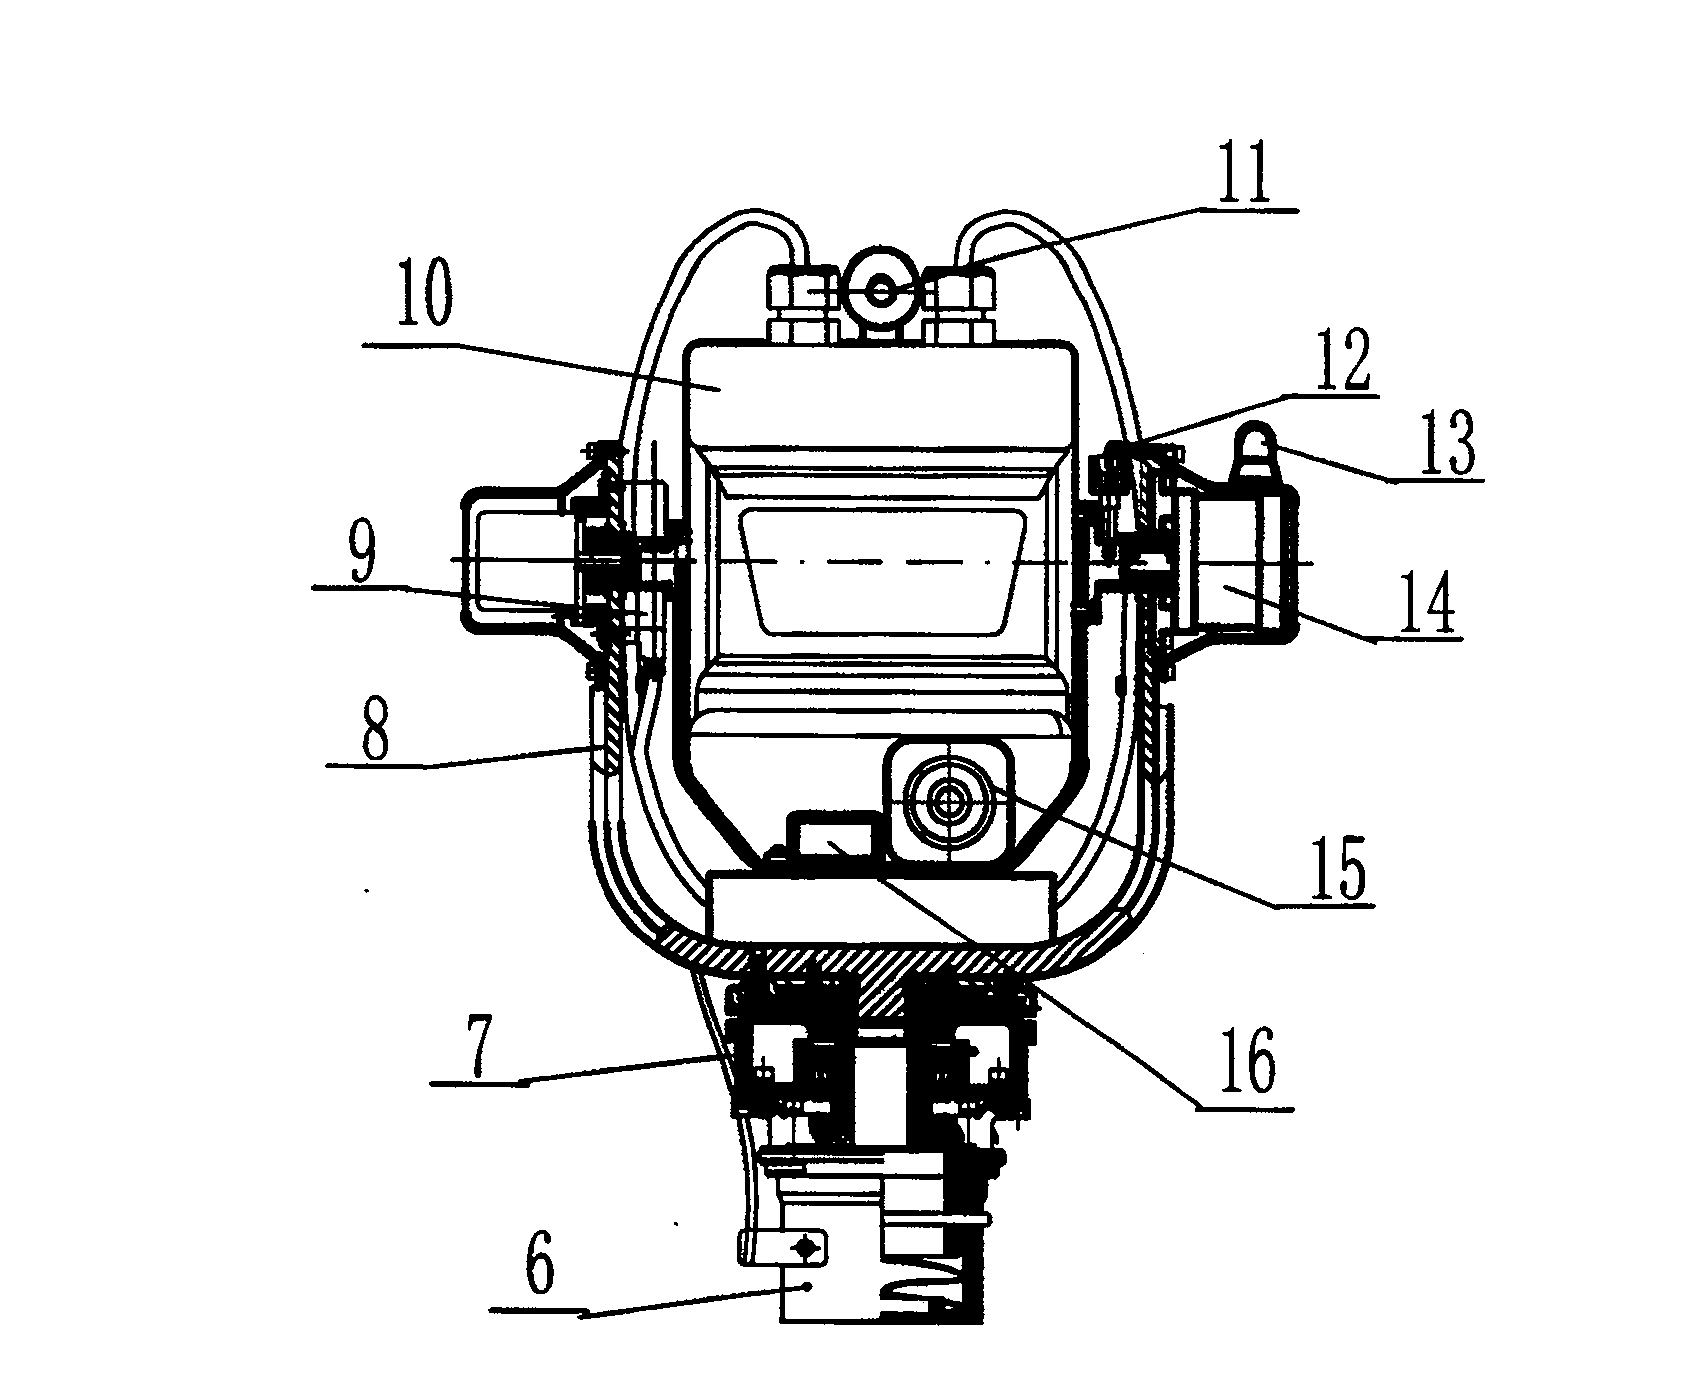 Over-limit measuring instrument and method of railway transportation equipment